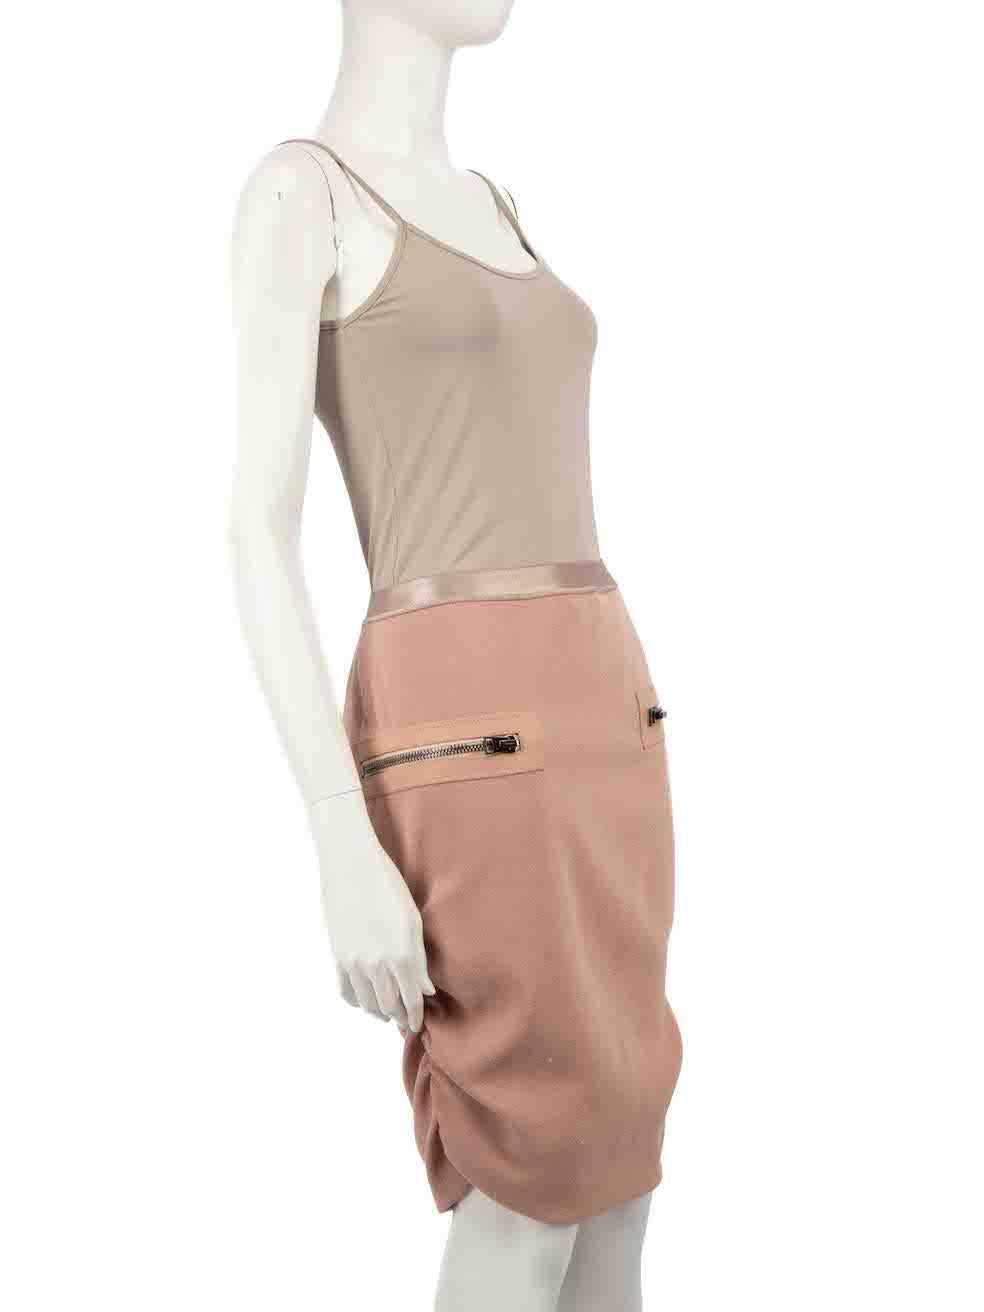 CONDITION is Very good. Hardly any visible wear to skirt is evident on this used Tom Ford designer resale item.
 
 
 
 Details
 
 
 Dusty pink
 
 Synthetic
 
 Skirt
 
 Knee length
 
 Ruched hem detail
 
 Elasticated waistband
 
 2x Side zipped